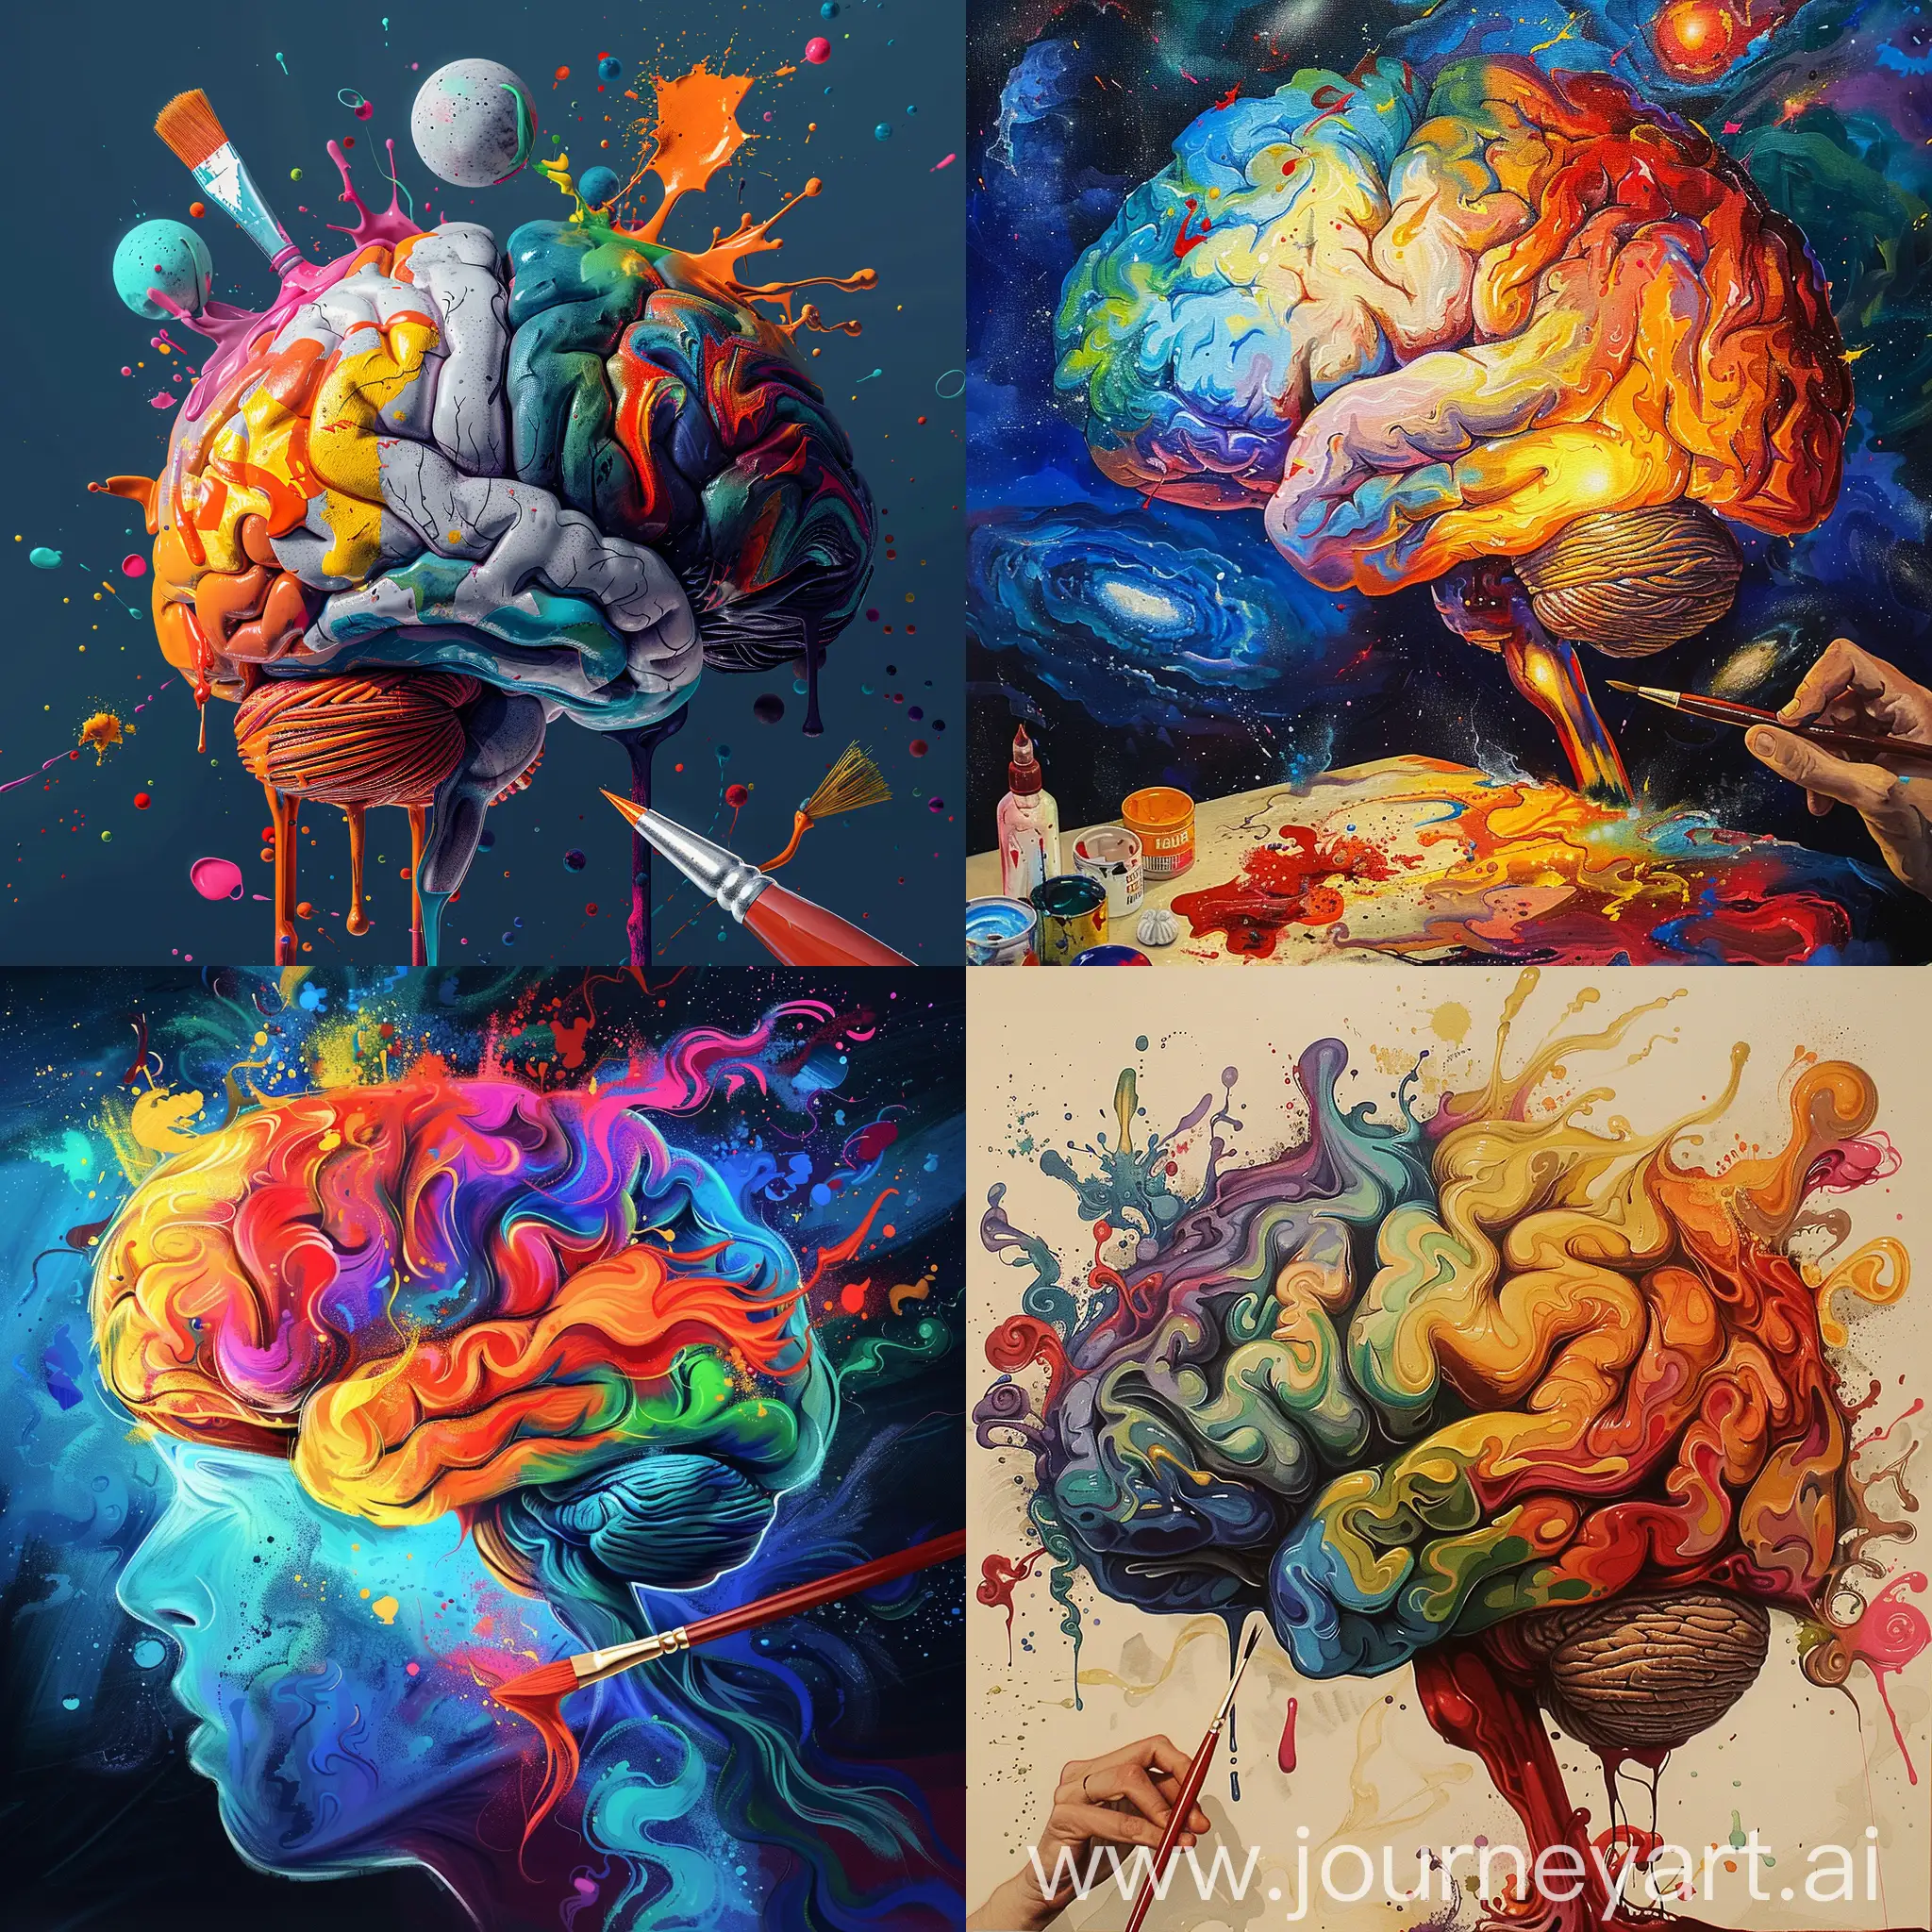 Creative-Brain-Designing-and-Painting-with-Vibrant-Colors